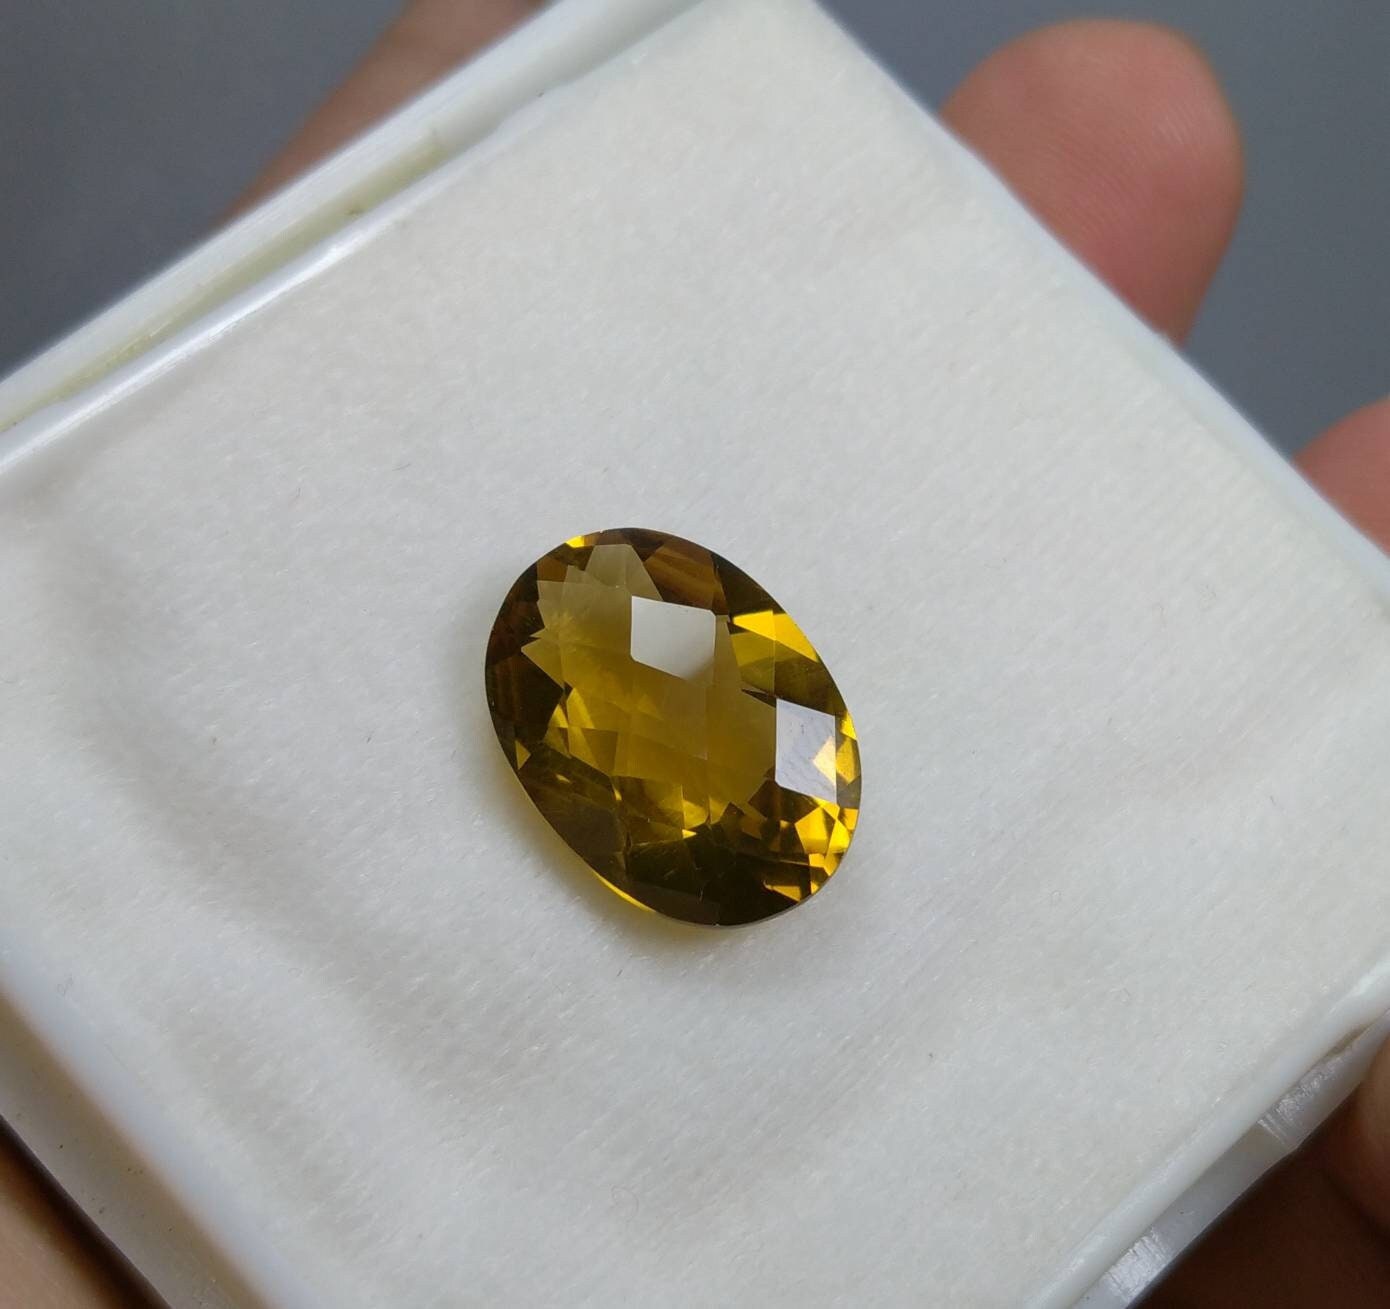 ARSAA GEMS AND MINERALSNatural top quality beautiful 10 carat checkerboard shape faceted citrine gem - Premium  from ARSAA GEMS AND MINERALS - Just $30.00! Shop now at ARSAA GEMS AND MINERALS